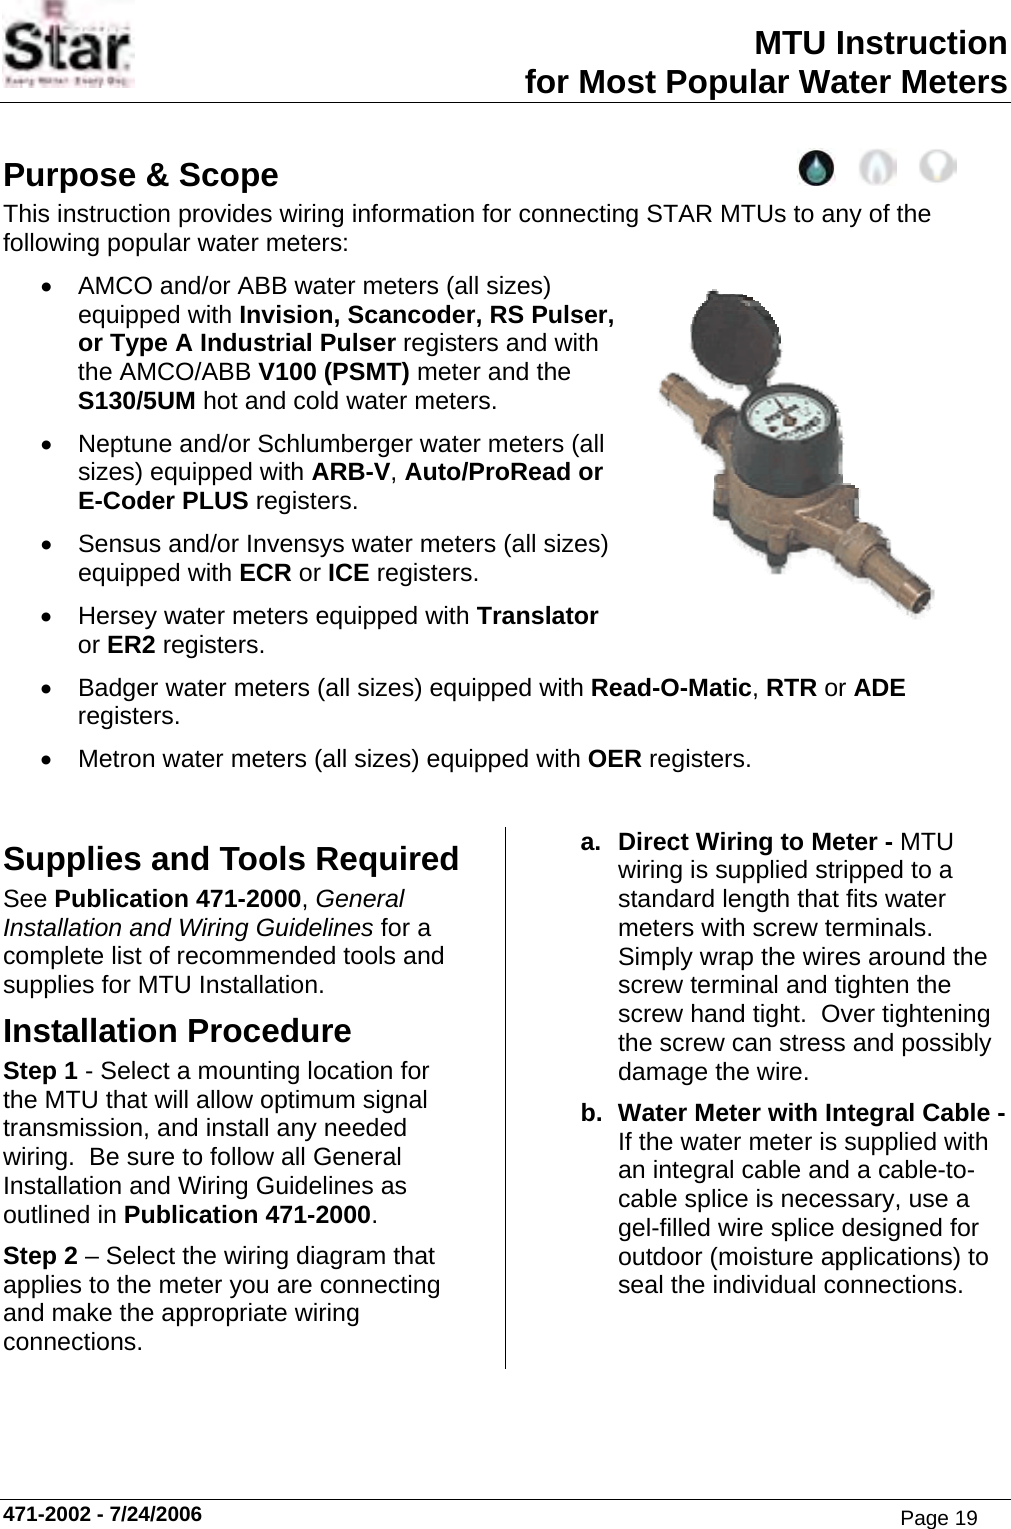 MTU Instruction for Most Popular Water Meters Purpose &amp; Scope This instruction provides wiring information for connecting STAR MTUs to any of the following popular water meters: •  AMCO and/or ABB water meters (all sizes) equipped with Invision, Scancoder, RS Pulser, or Type A Industrial Pulser registers and with the AMCO/ABB V100 (PSMT) meter and the S130/5UM hot and cold water meters. •  Neptune and/or Schlumberger water meters (all sizes) equipped with ARB-V, Auto/ProRead or E-Coder PLUS registers. •  Sensus and/or Invensys water meters (all sizes) equipped with ECR or ICE registers. •  Hersey water meters equipped with Translator or ER2 registers. •  Badger water meters (all sizes) equipped with Read-O-Matic, RTR or ADE registers. •  Metron water meters (all sizes) equipped with OER registers.  Supplies and Tools Required See Publication 471-2000, General Installation and Wiring Guidelines for a complete list of recommended tools and supplies for MTU Installation. Installation Procedure Step 1 - Select a mounting location for the MTU that will allow optimum signal transmission, and install any needed wiring.  Be sure to follow all General Installation and Wiring Guidelines as outlined in Publication 471-2000. Step 2 – Select the wiring diagram that applies to the meter you are connecting and make the appropriate wiring connections. a.  Direct Wiring to Meter - MTU wiring is supplied stripped to a standard length that fits water meters with screw terminals. Simply wrap the wires around the screw terminal and tighten the screw hand tight.  Over tightening the screw can stress and possibly damage the wire. b.  Water Meter with Integral Cable - If the water meter is supplied with an integral cable and a cable-to-cable splice is necessary, use a gel-filled wire splice designed for outdoor (moisture applications) to seal the individual connections. 471-2002 - 7/24/2006 Page 19